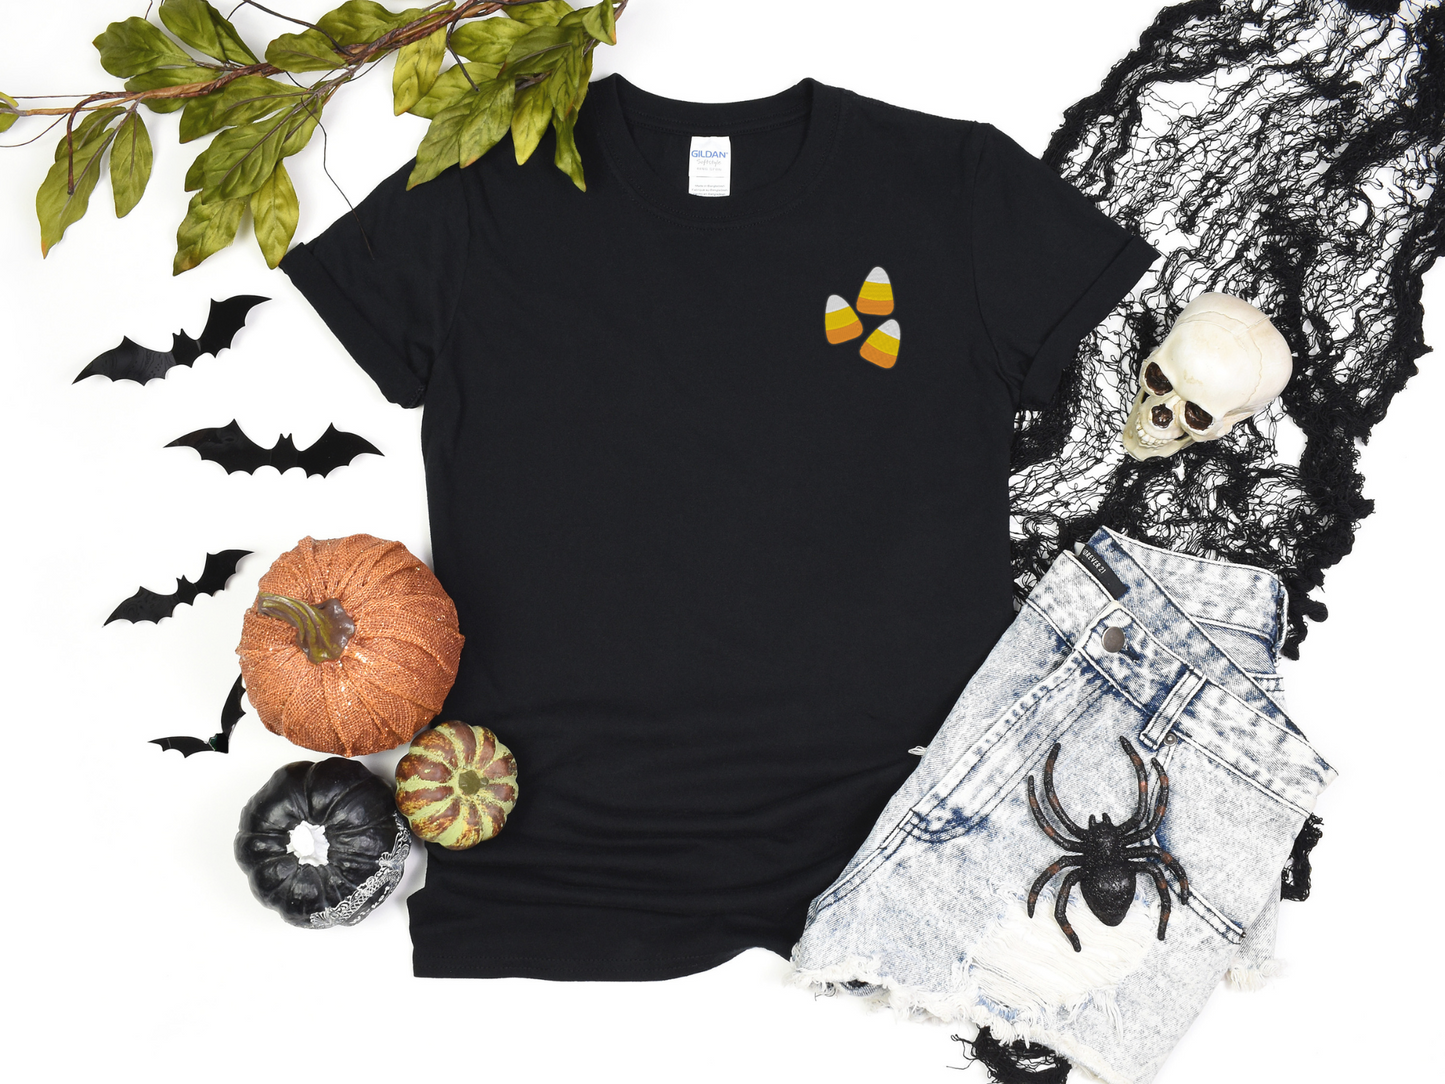 Embroidered Candy Corn T-shirt